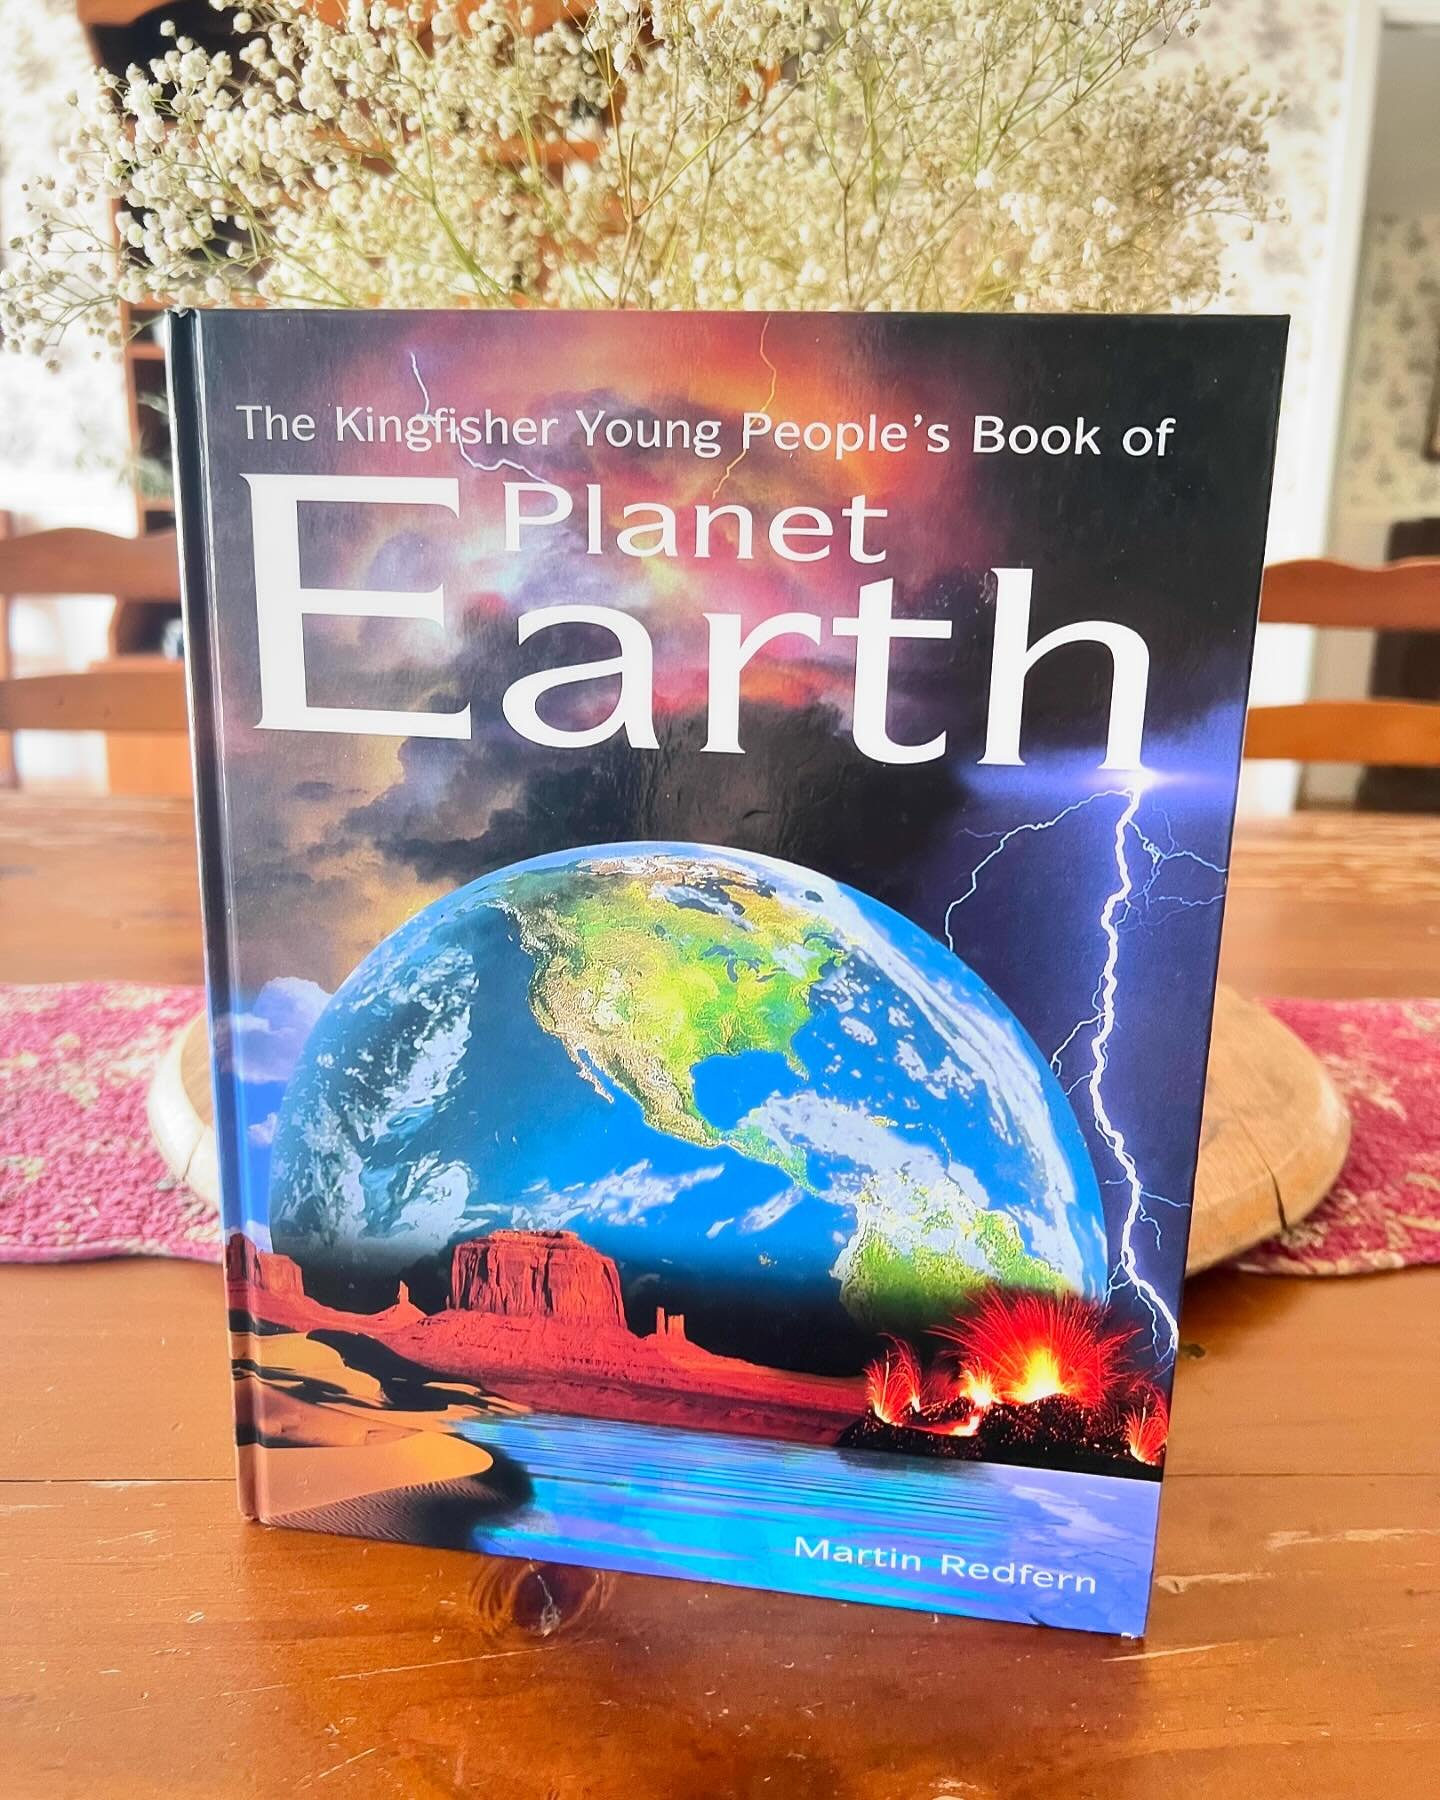 &ldquo;The Kingfisher Young People&rsquo;s Book of Planet Earth&rdquo; by Martin Redfern, 1999

A great all-around book that covers all sorts of topics within earth science!

Hardcover, excellent condition 
&bull;
&bull;
$6.50 + shipping 
&bull;
&bul